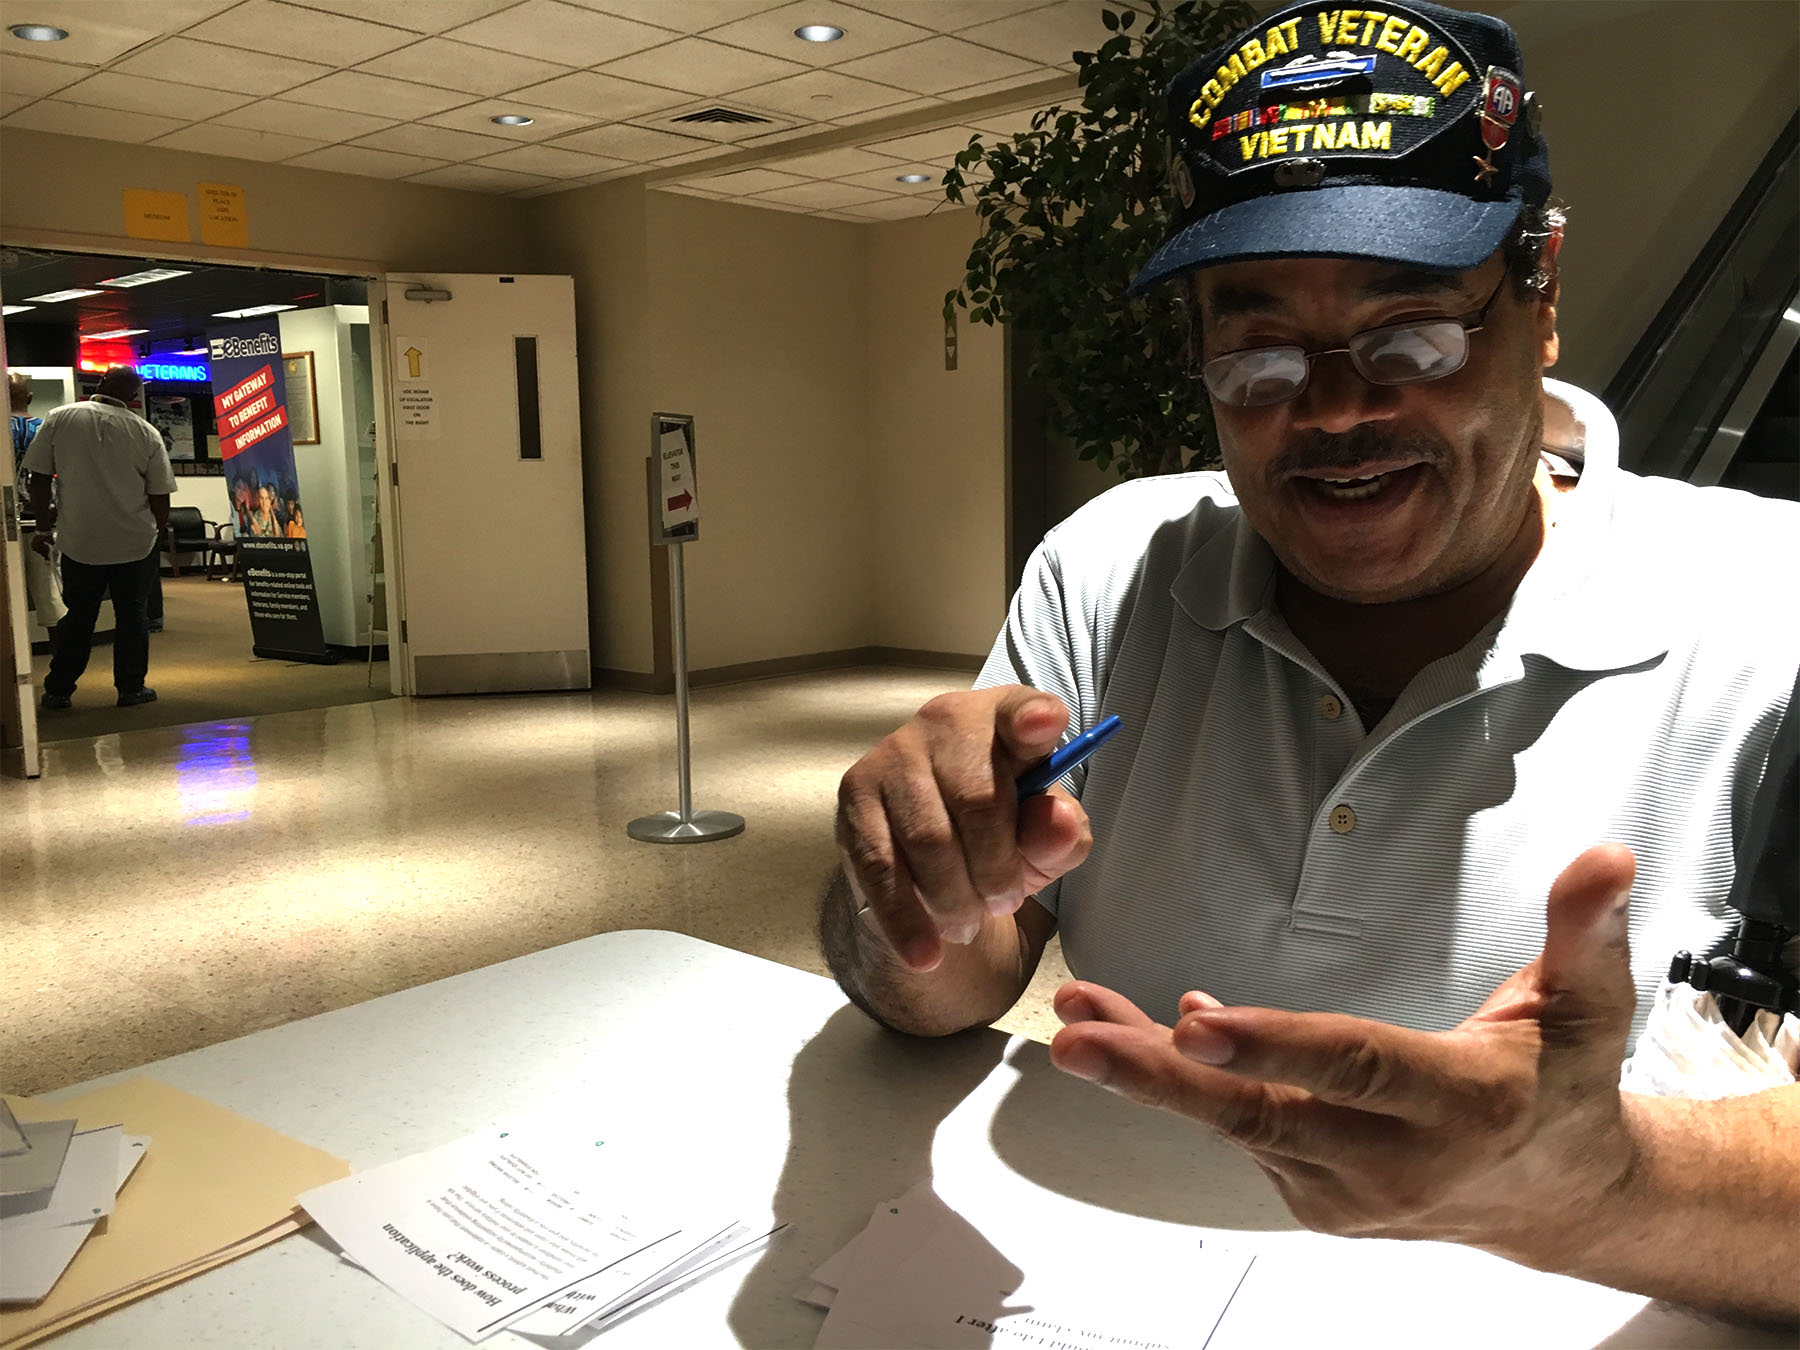 A person in a "Combat Veteran: Vietnam" hat gestures with his hands while talking at a table.